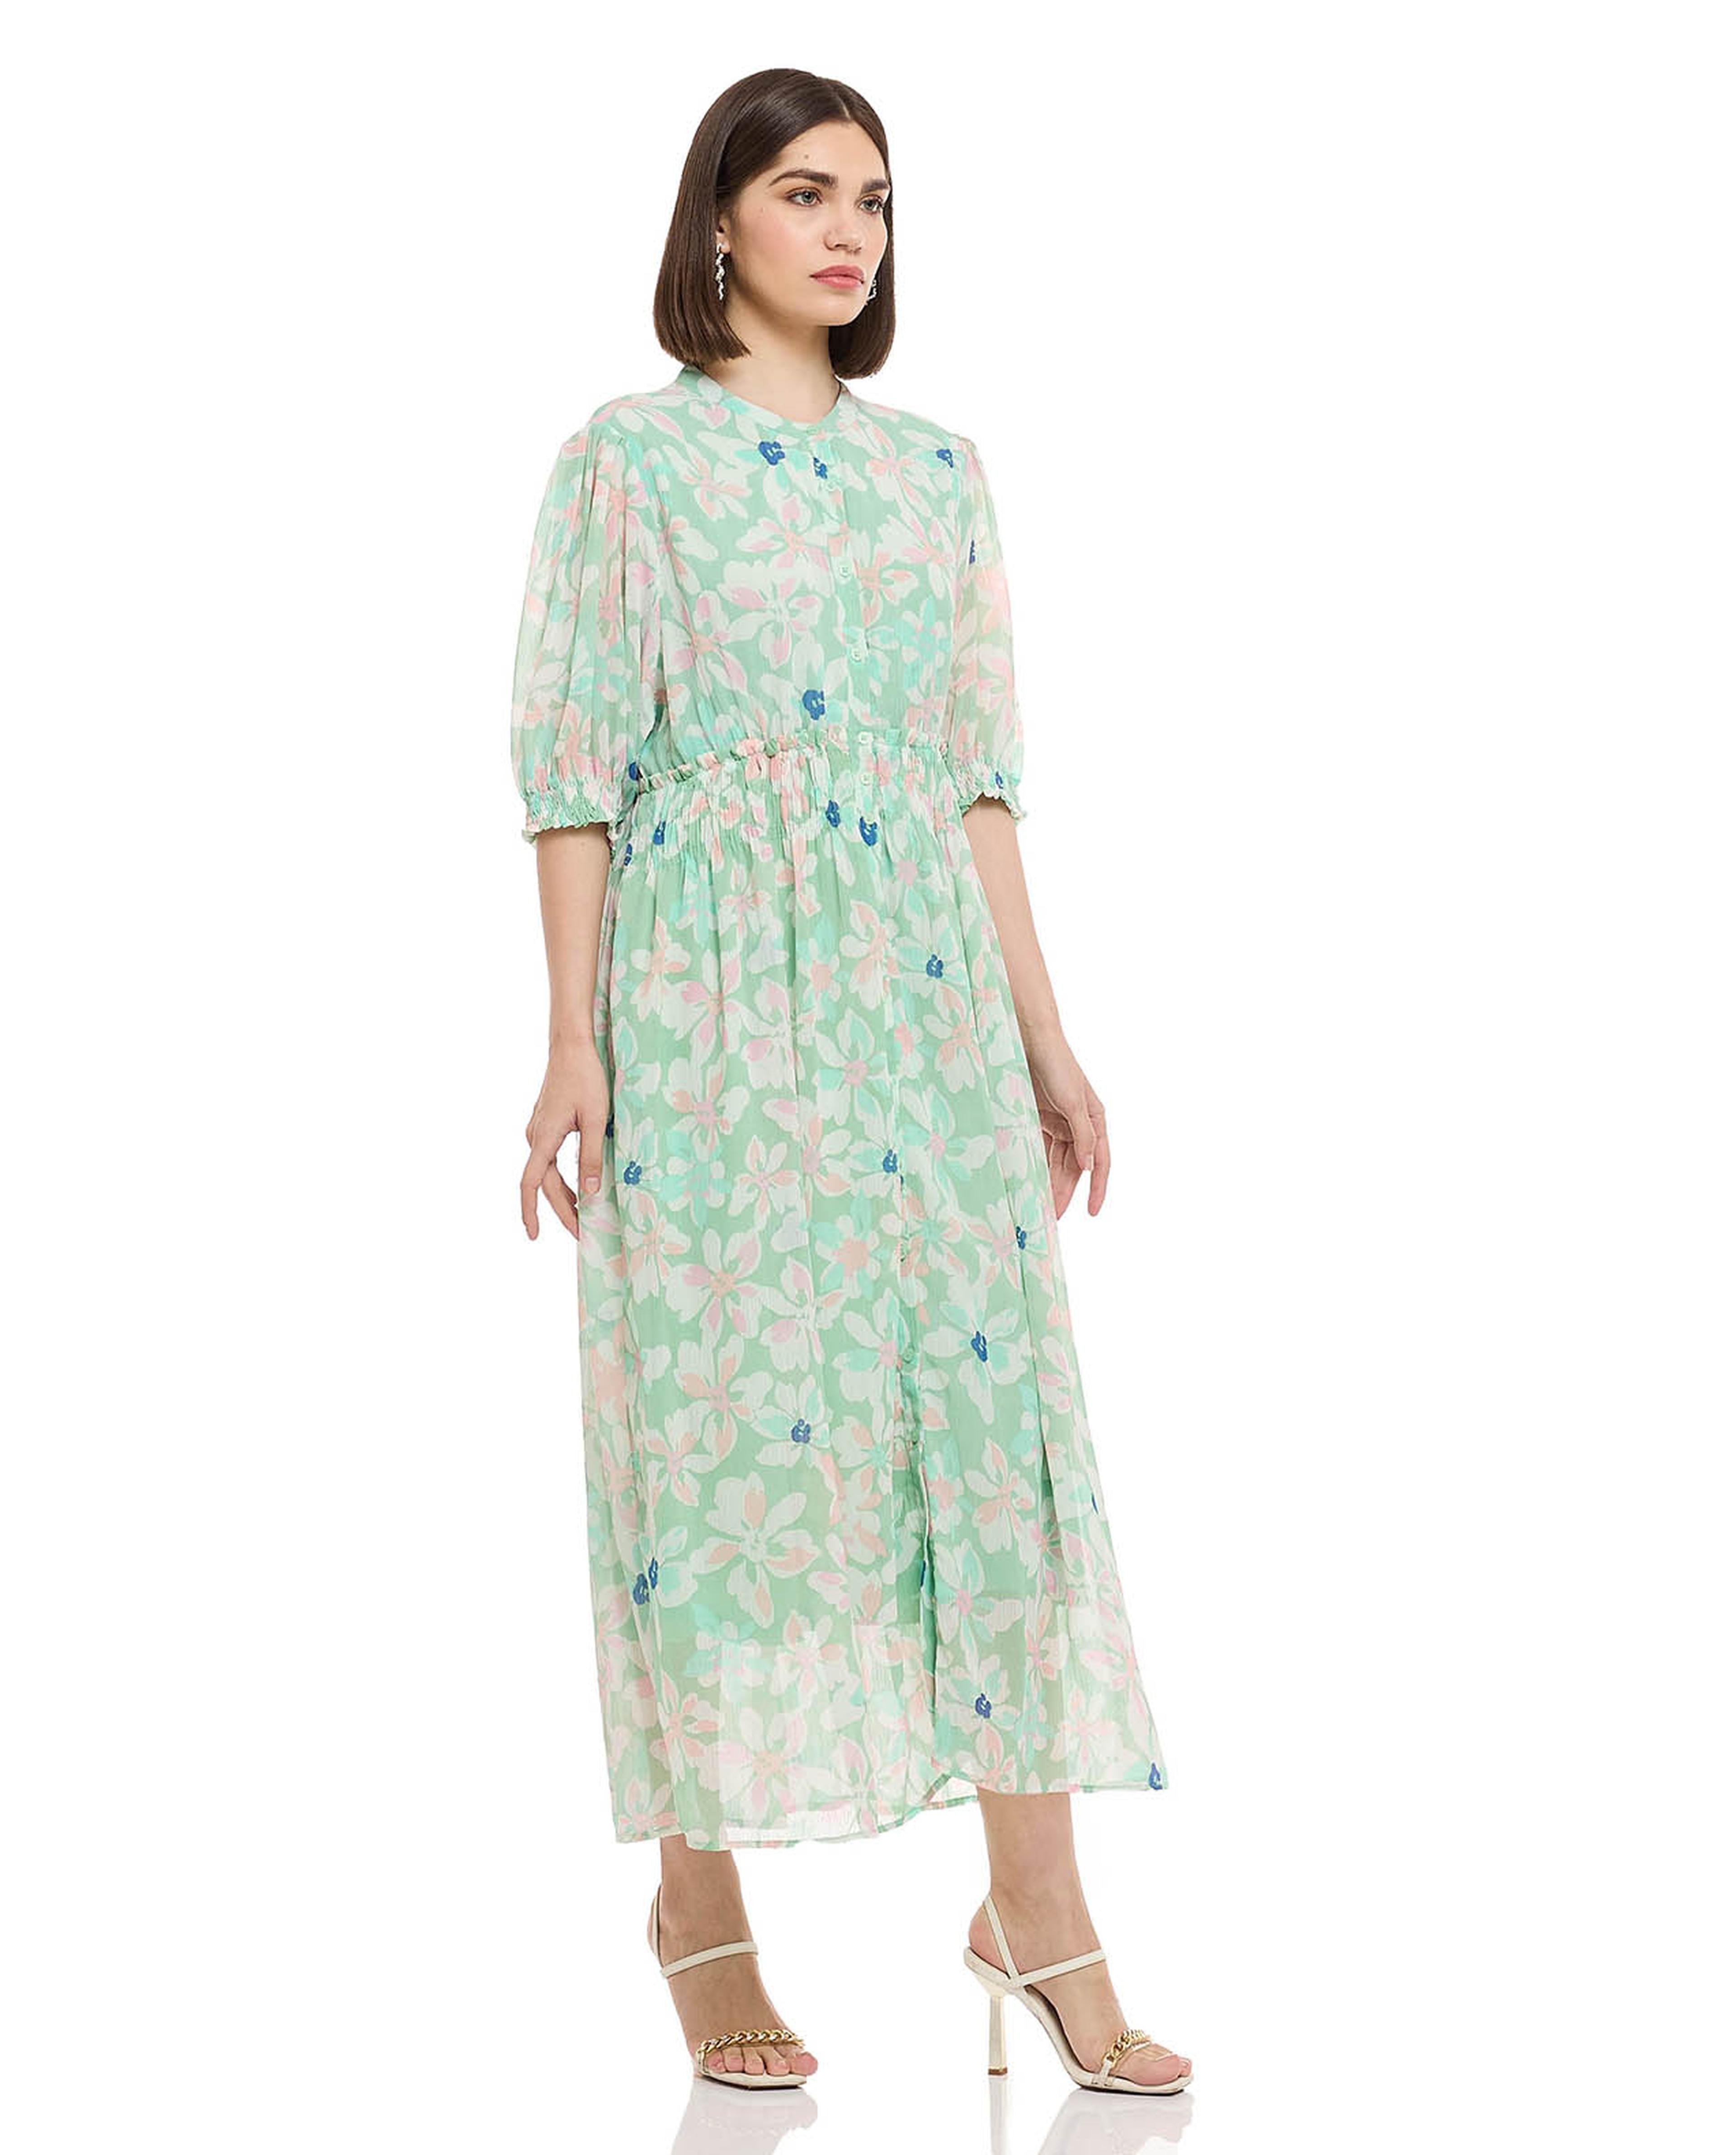 Floral Print Midi Dress with Stand Collar and Puff Sleeves